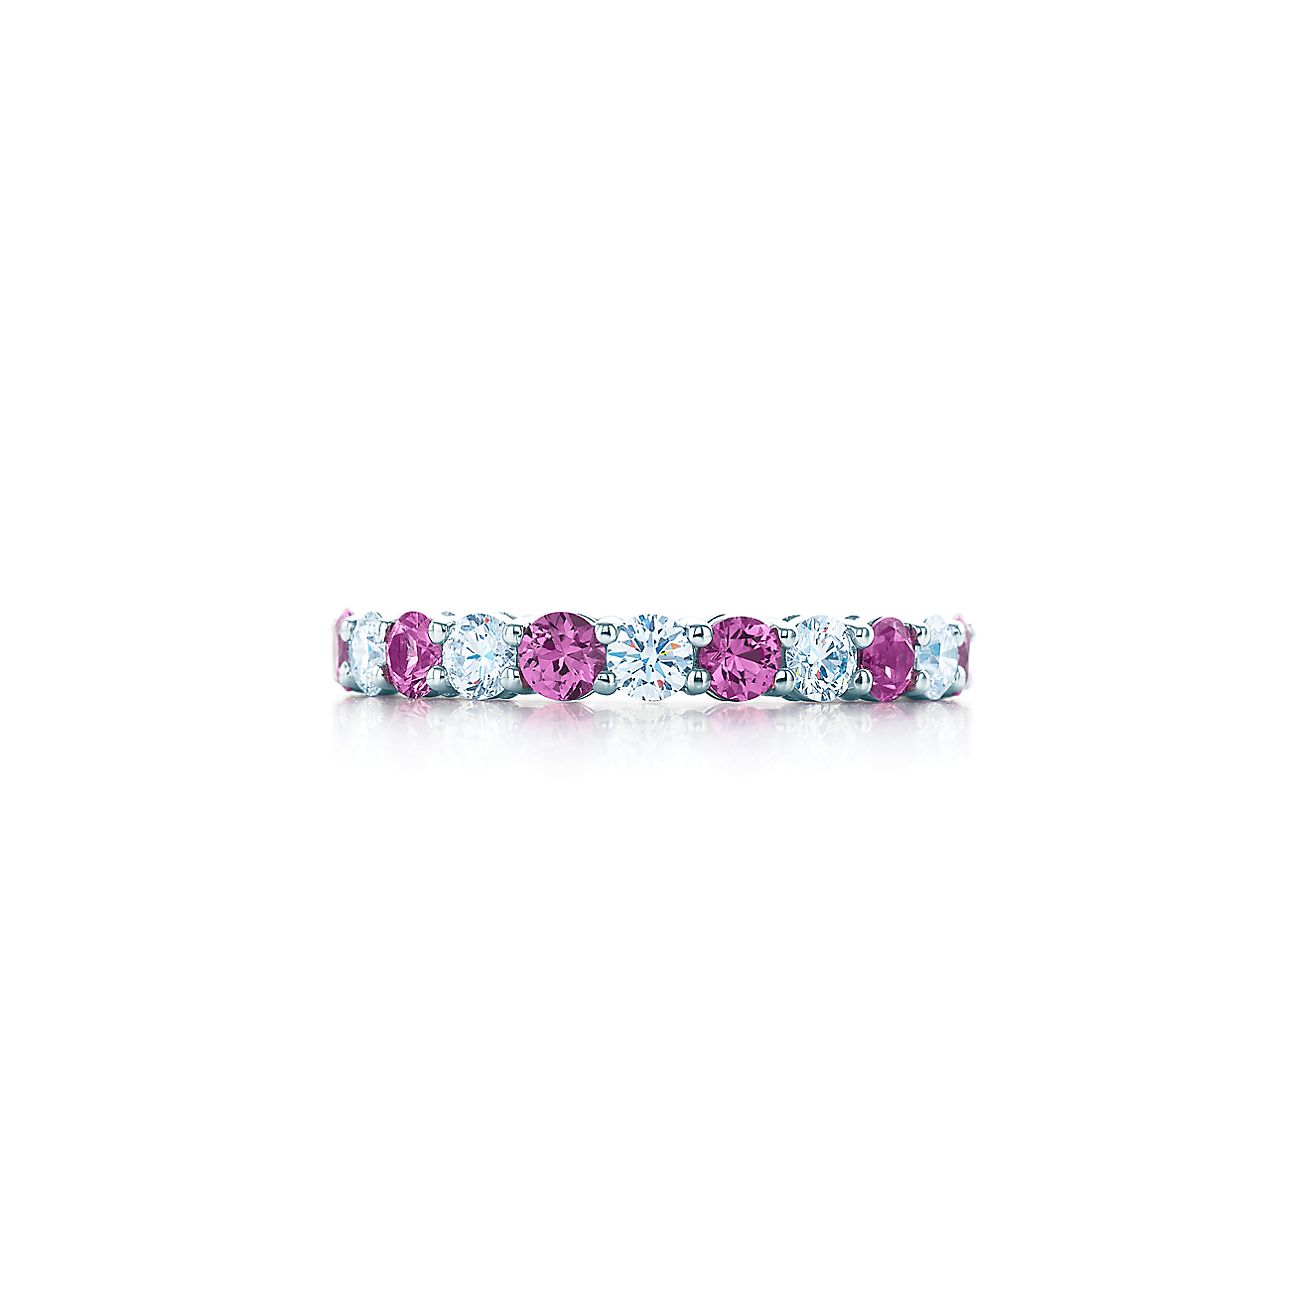 Tiffany & Co. Pink Sapphire and Diamond Embrace Band Ring by Tiffany & Co.